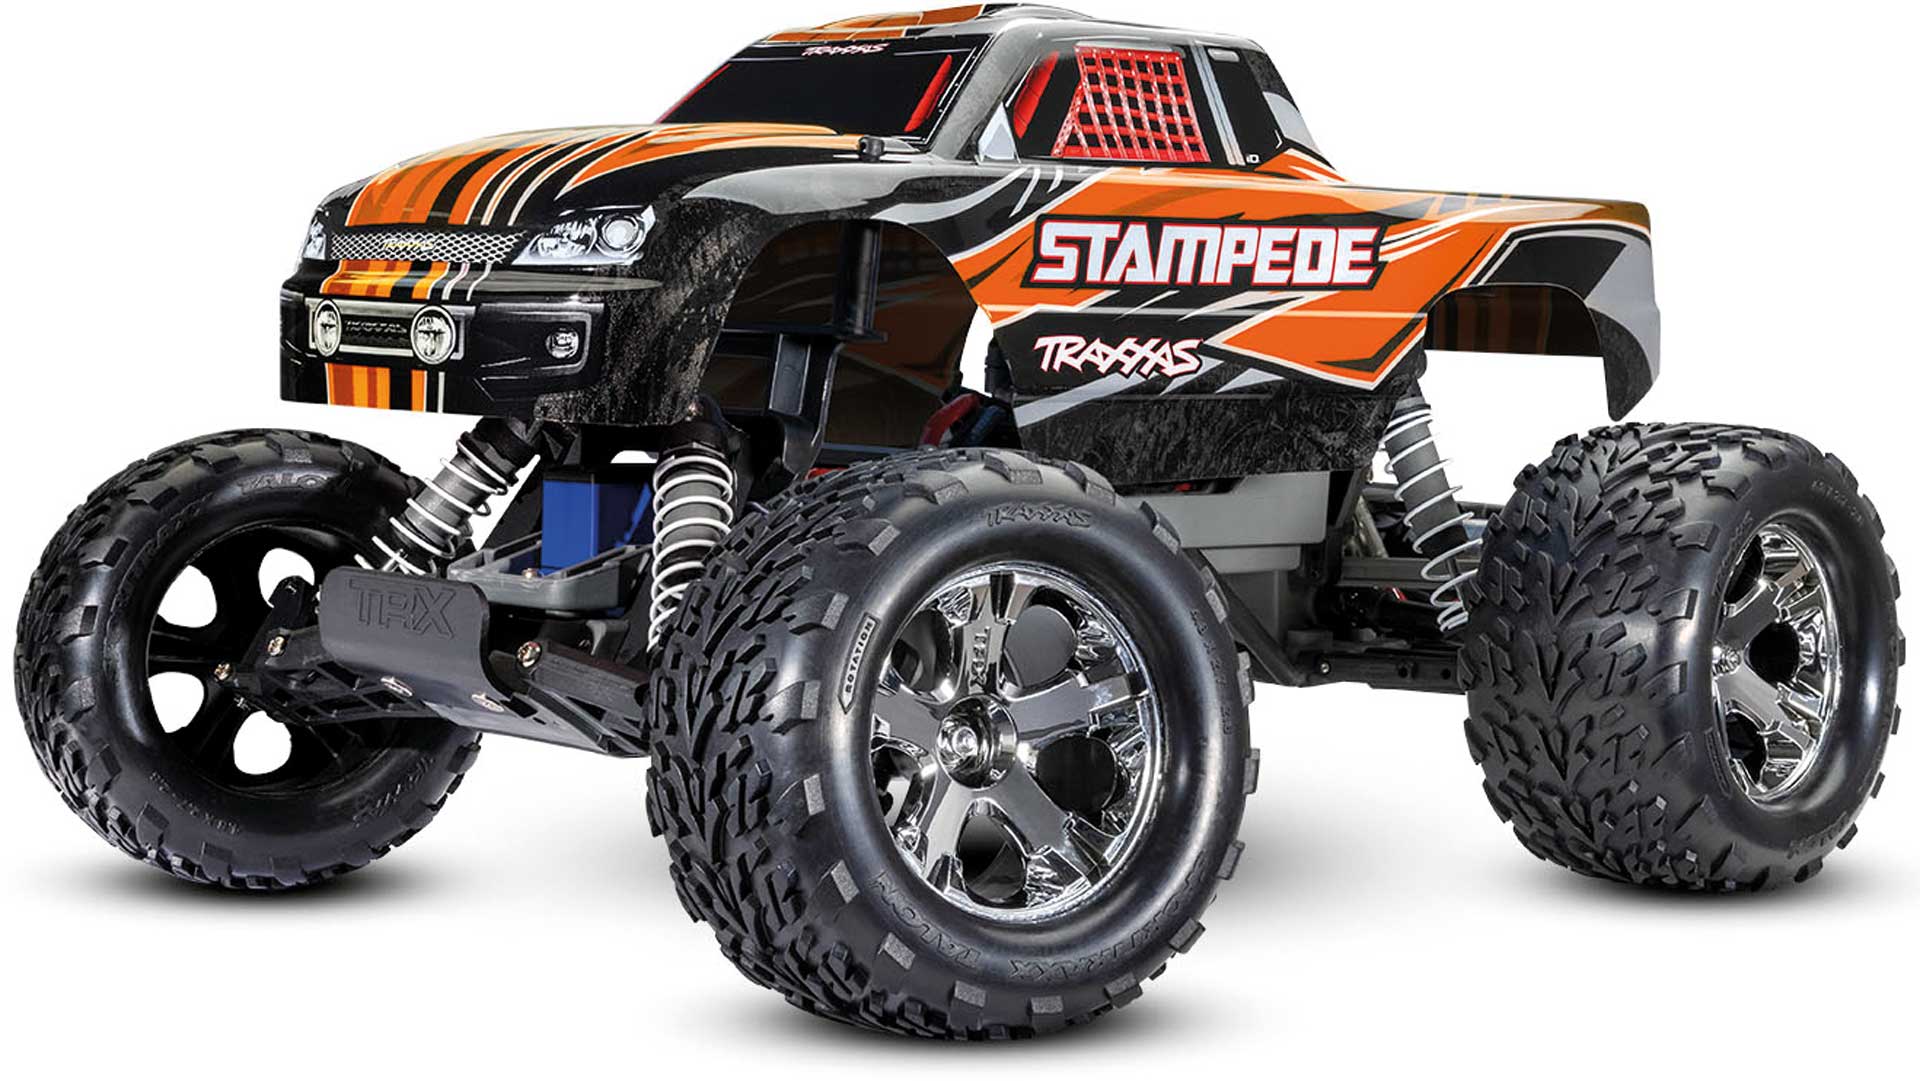 TRAXXAS STAMPEDE ORANGE 1/10 2WD MONSTER-TRUCK RTR BRUSHED, WITH BATTERY AND 4 AMP USB-C CHARGER